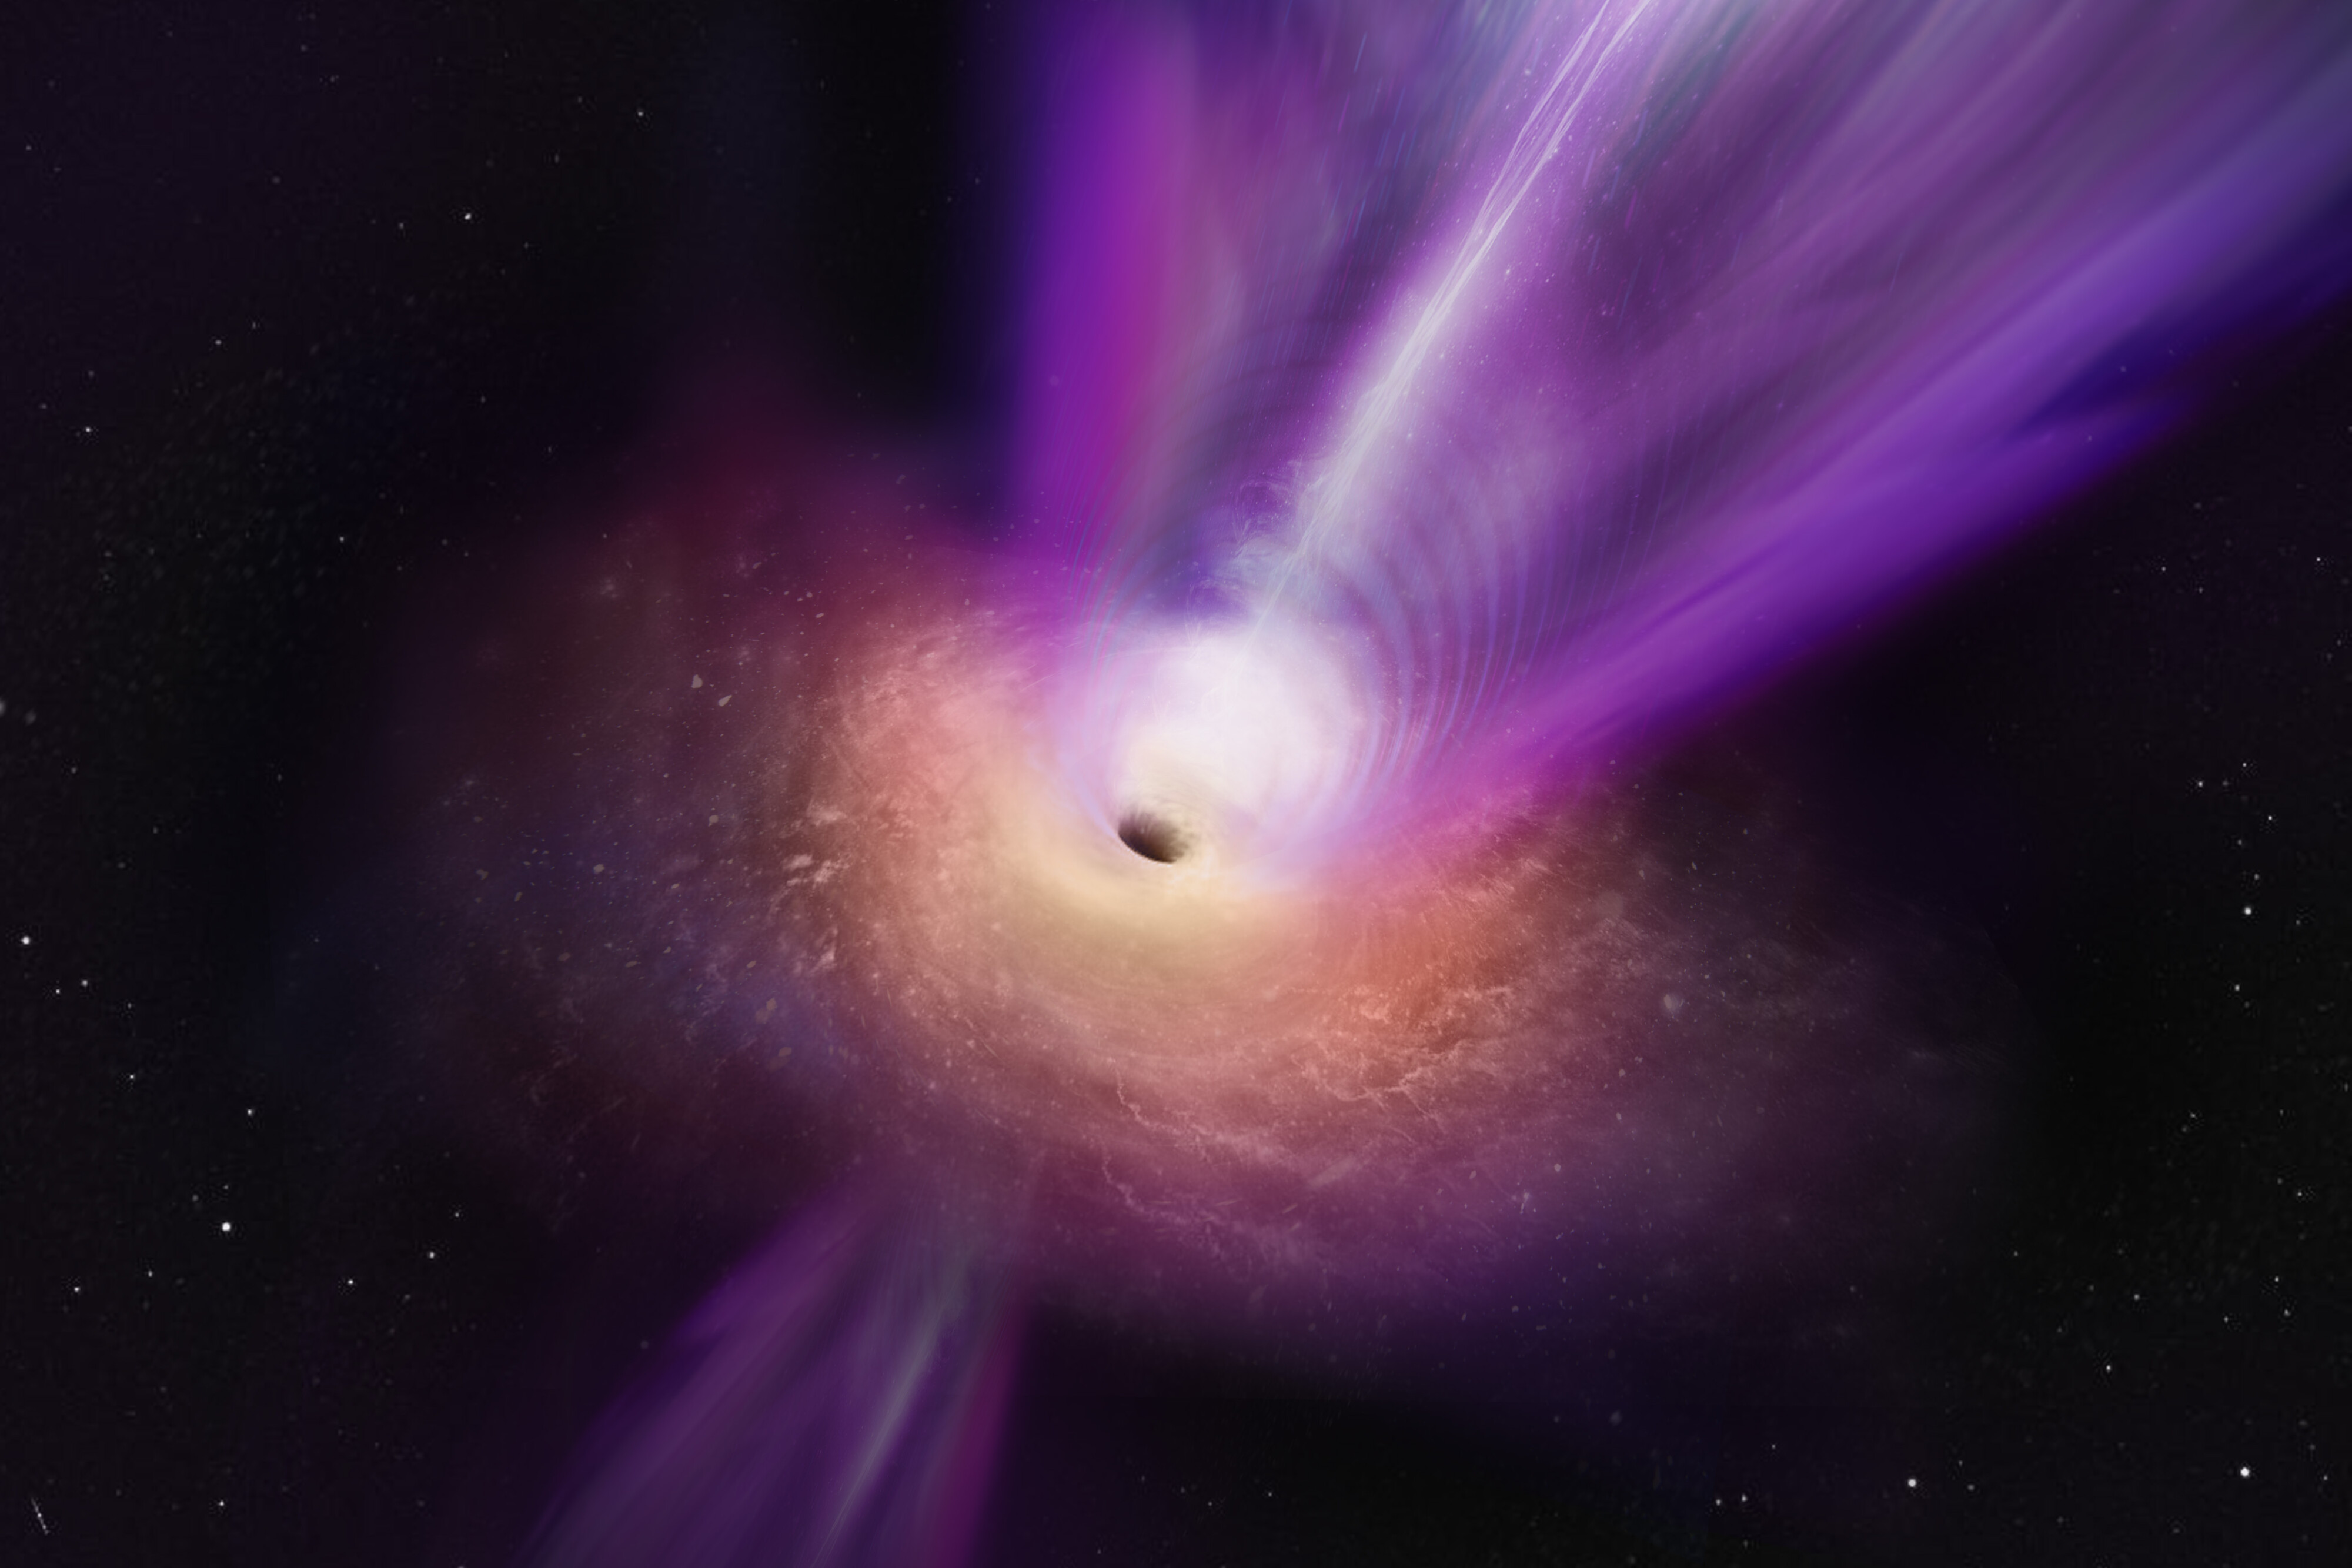 james webb space telescope finds 'extremely red' supermassive black hole growing in the early universe